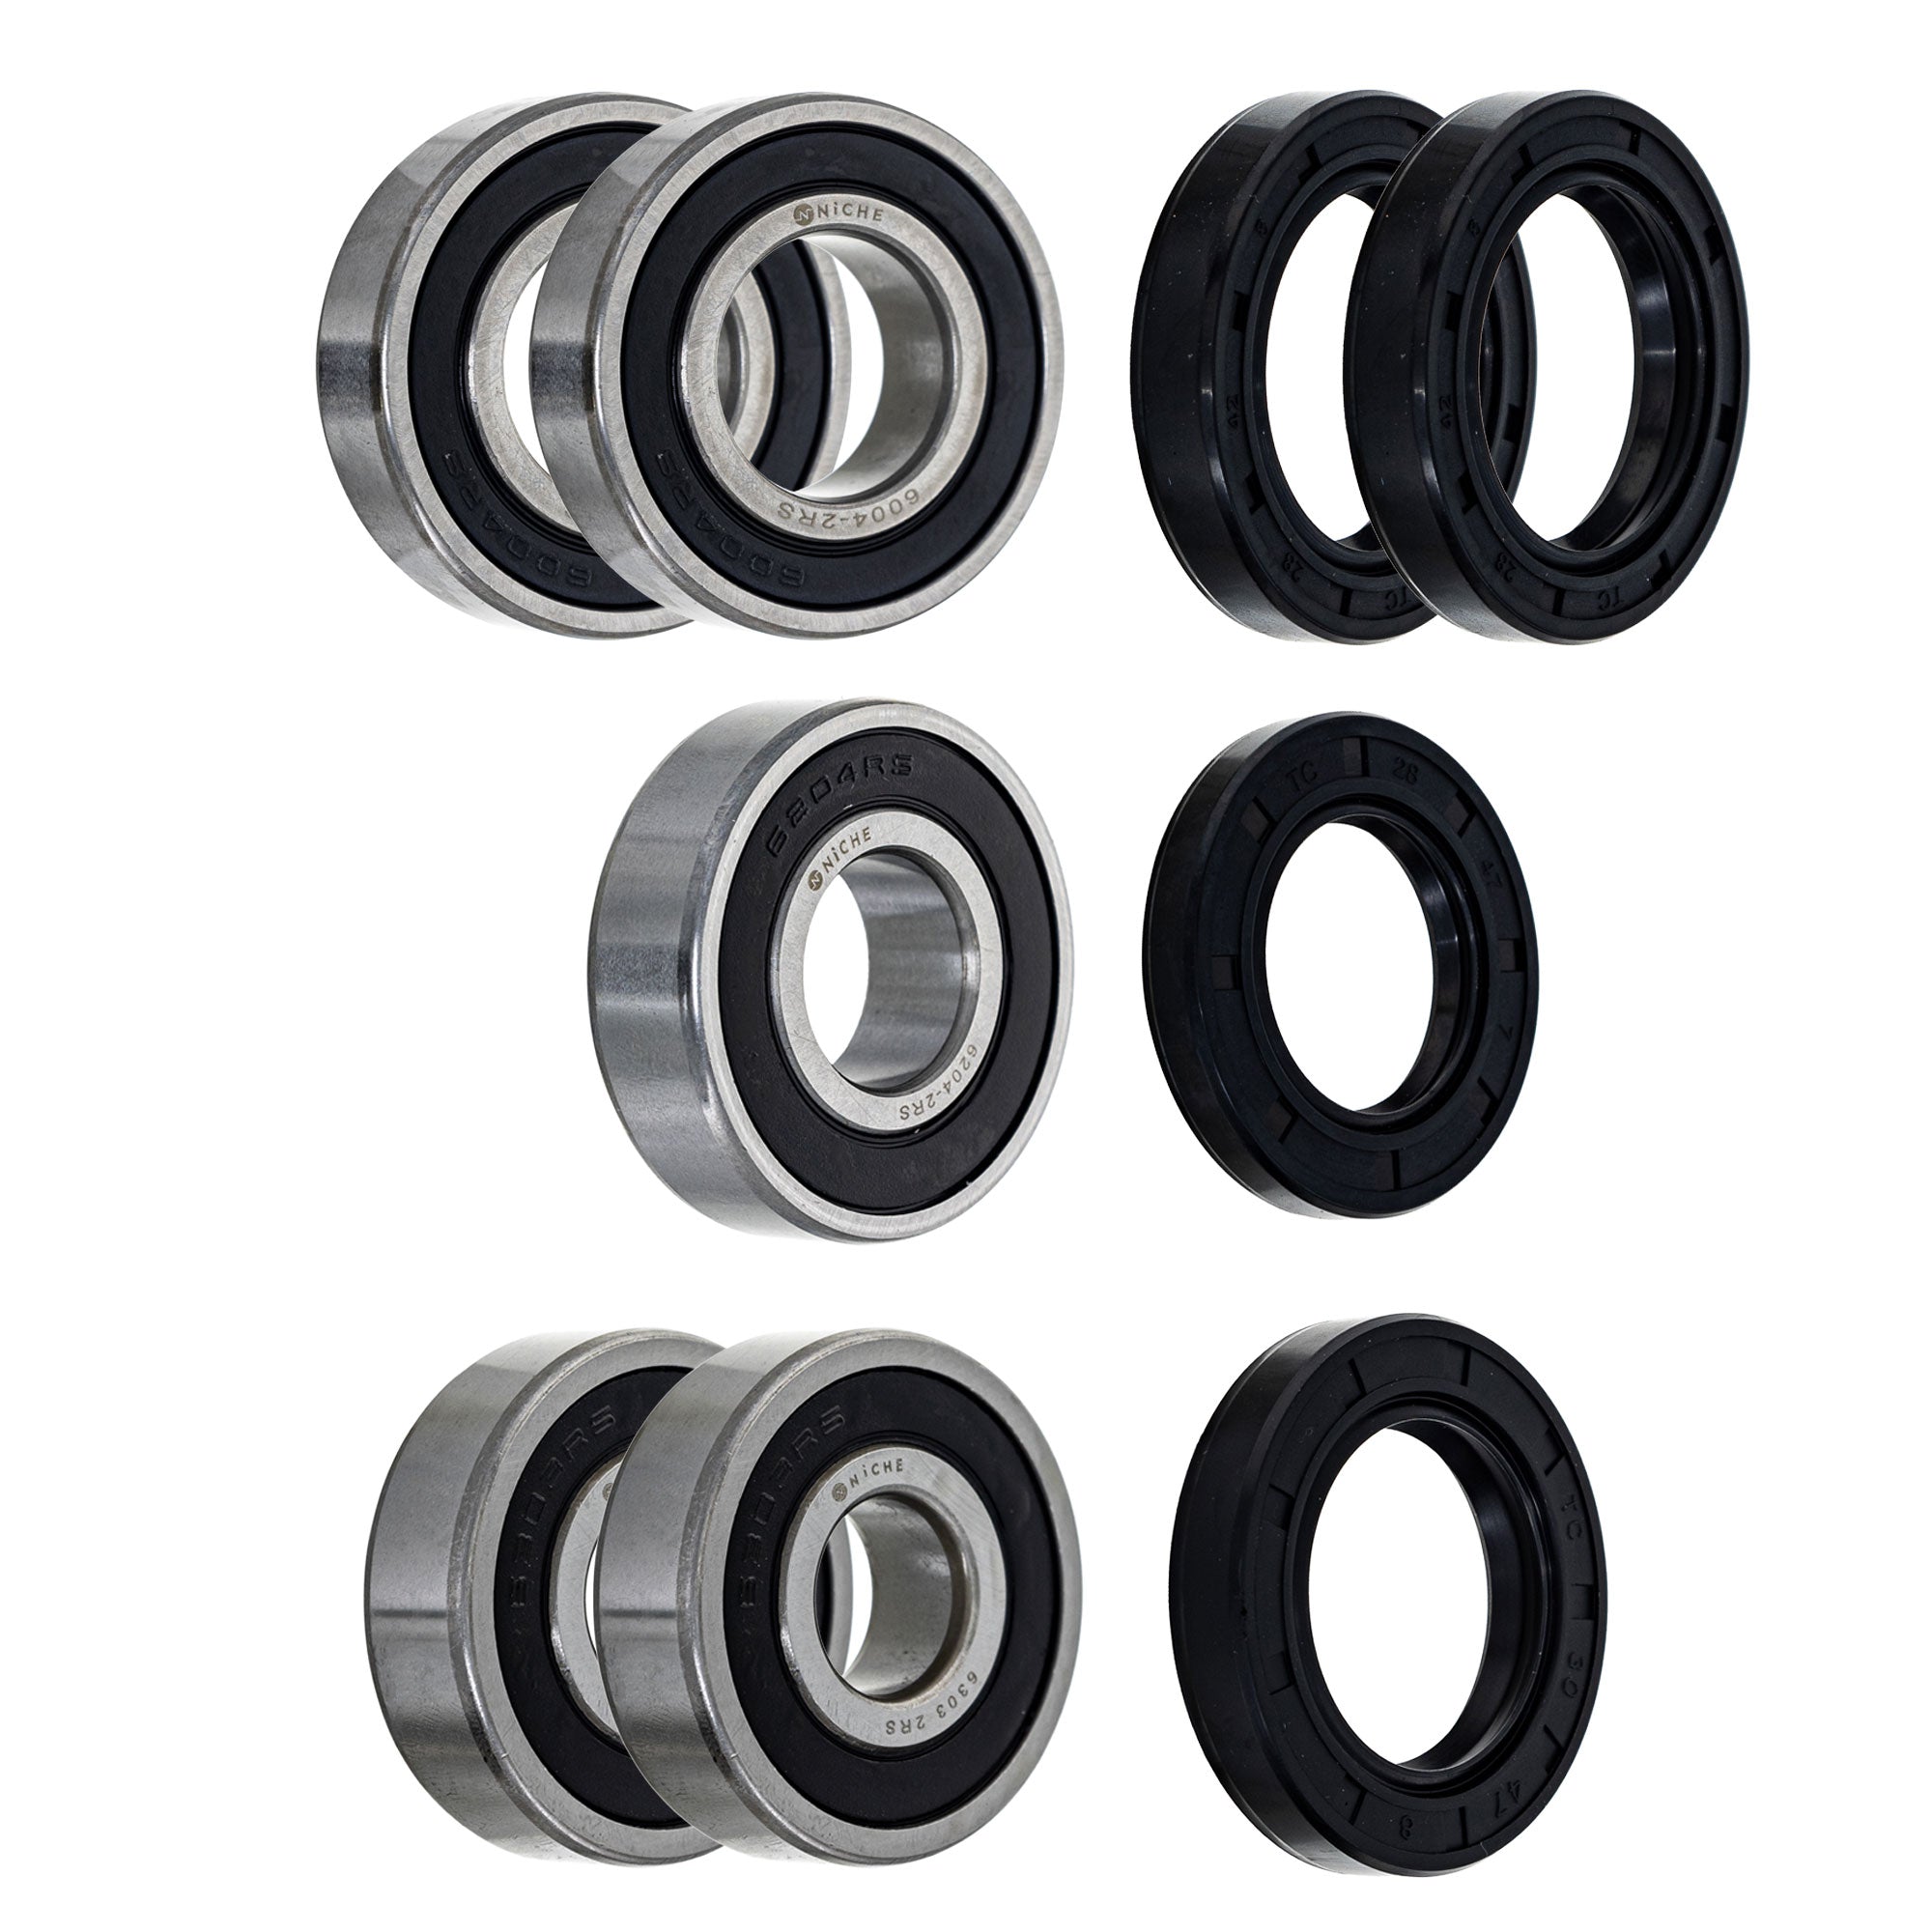 Wheel Bearing Seal Kit for zOTHER Ref No CB1 NICHE MK1008487